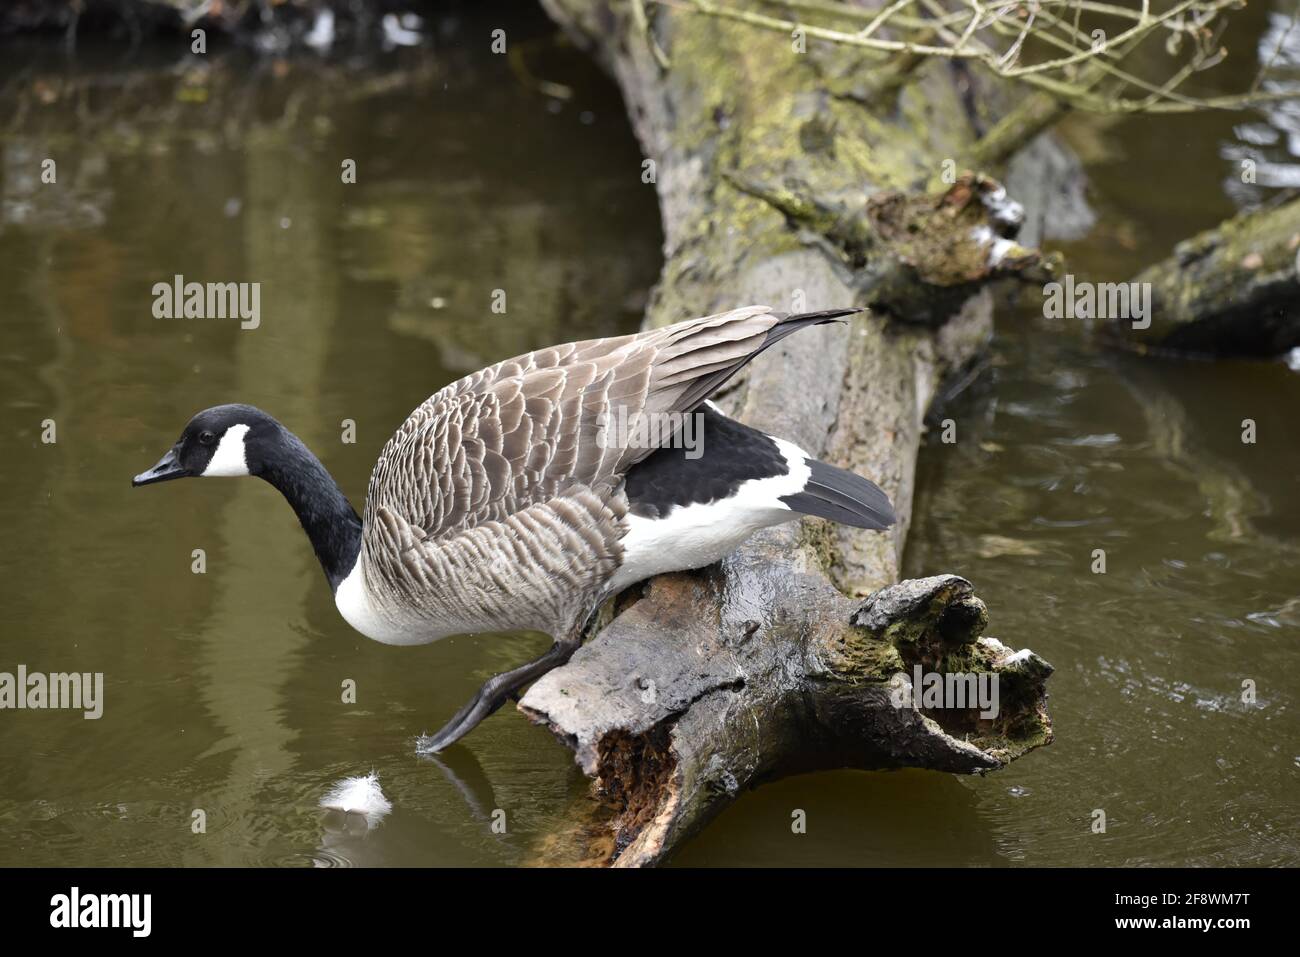 Canada Goose (Branta canadensis) Stepping Down from Decaying Tree Log into Lake in the UK in Spring Stock Photo